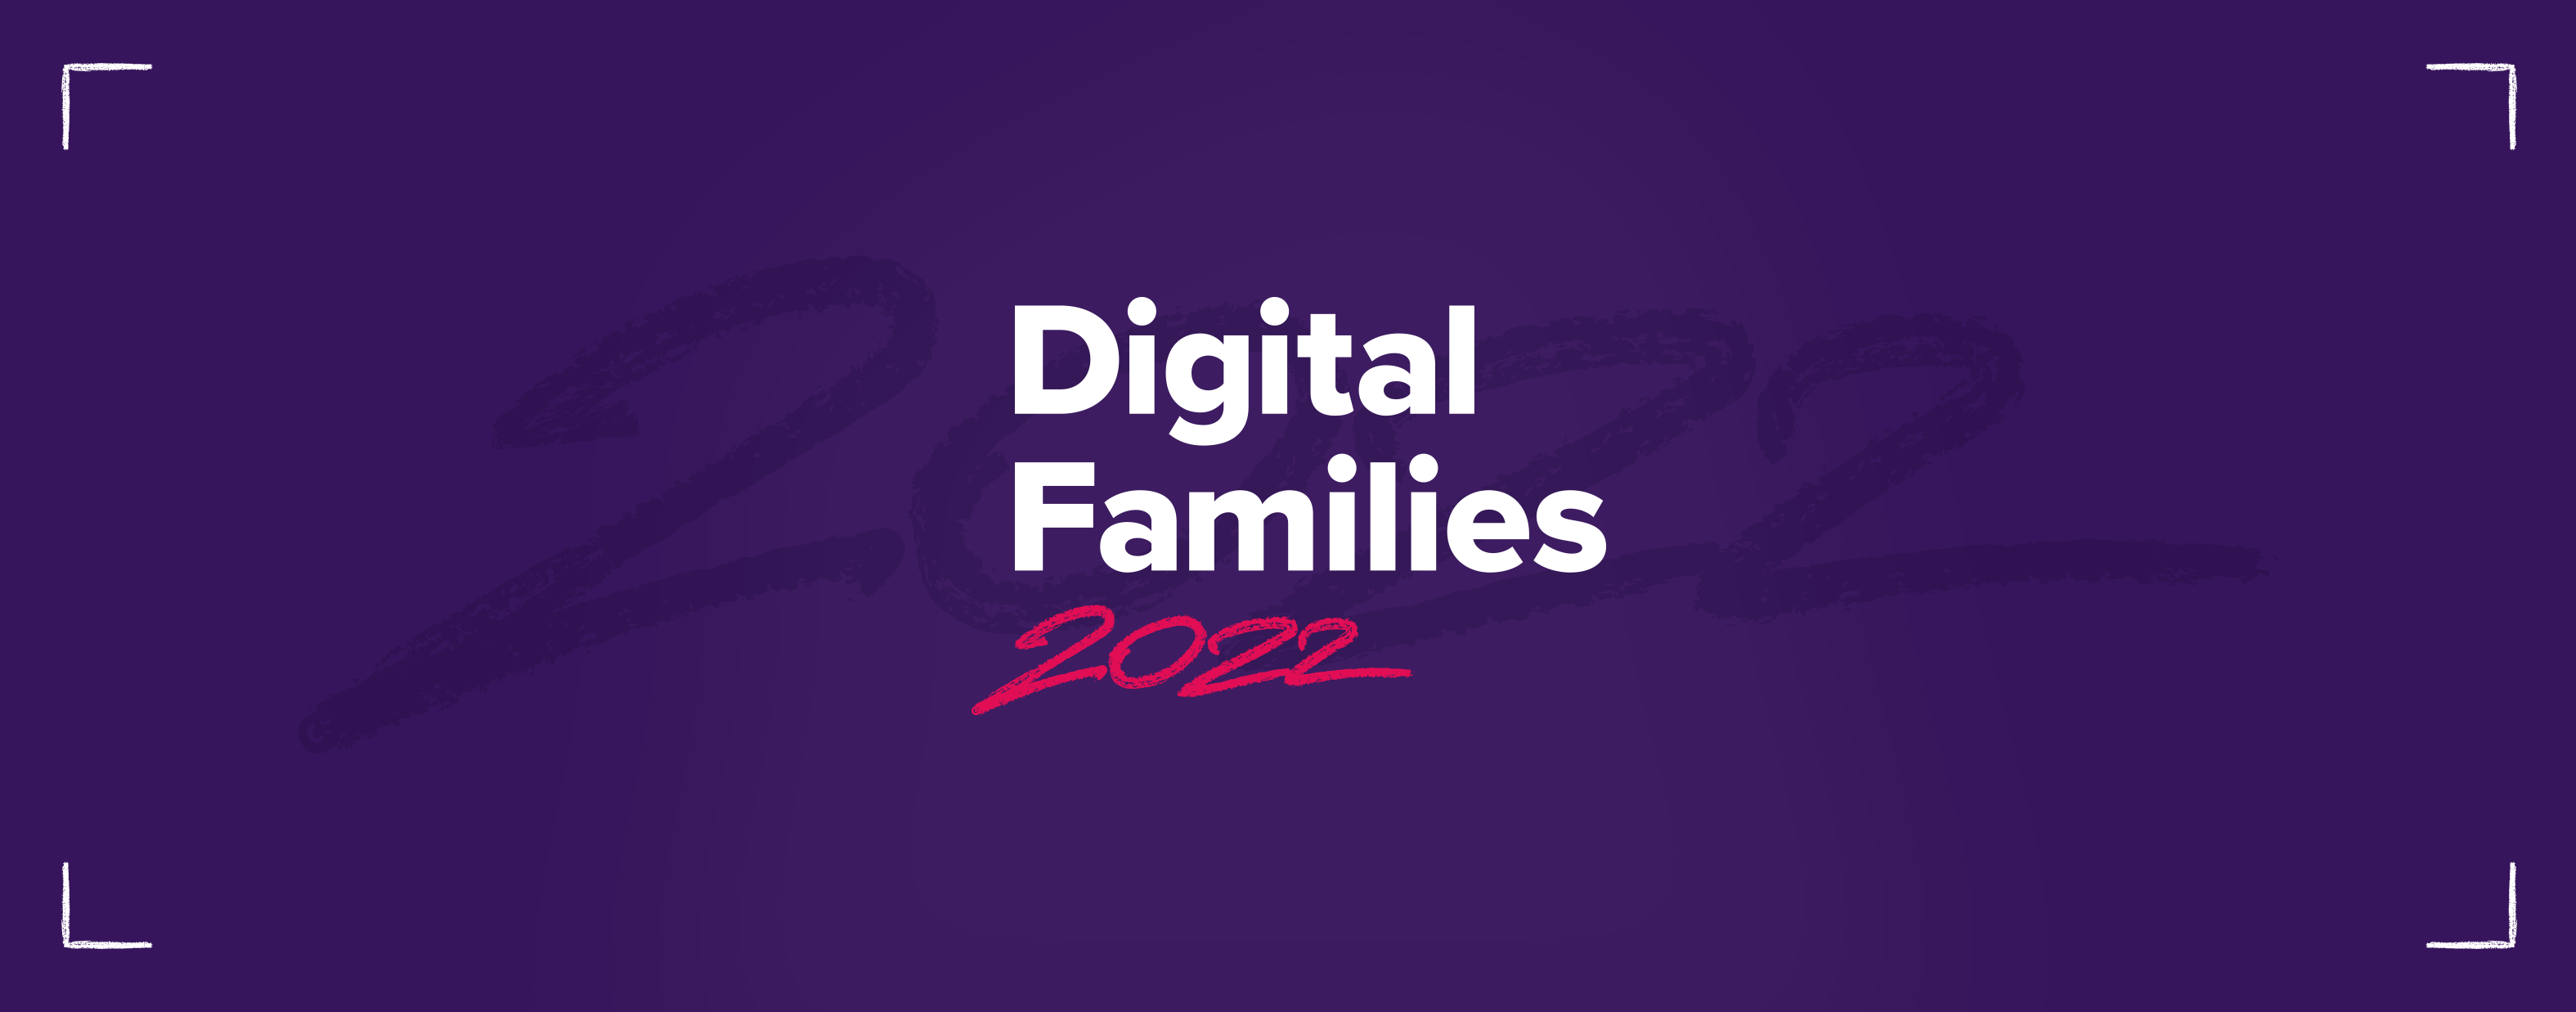 Digital Families Conference Banner 